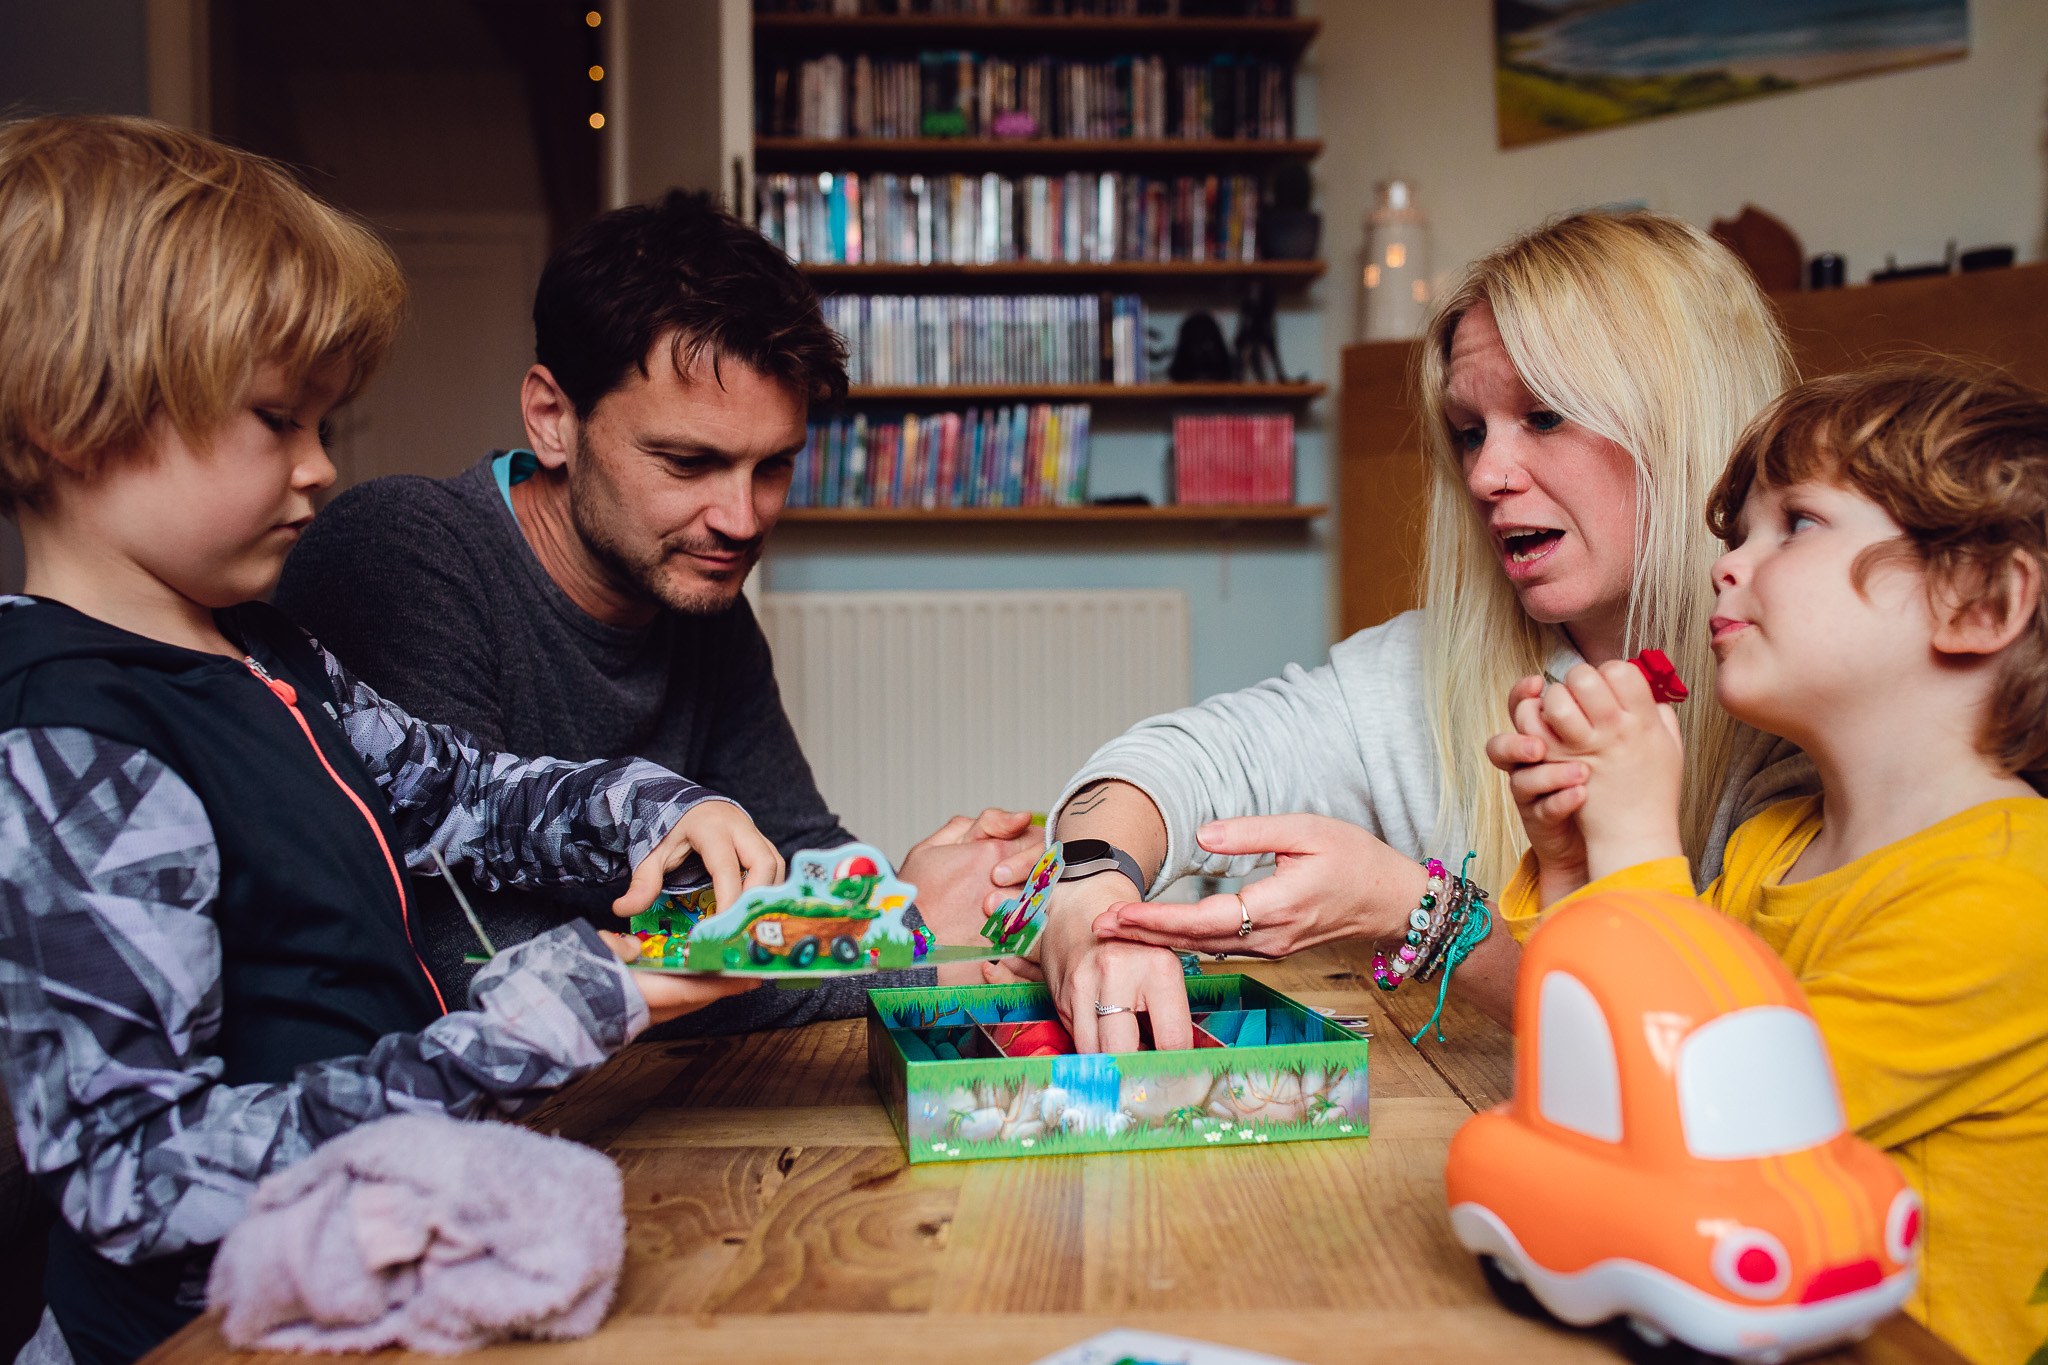 Leo and Kai play a board game in their living room with mum and dad during a family photo session.